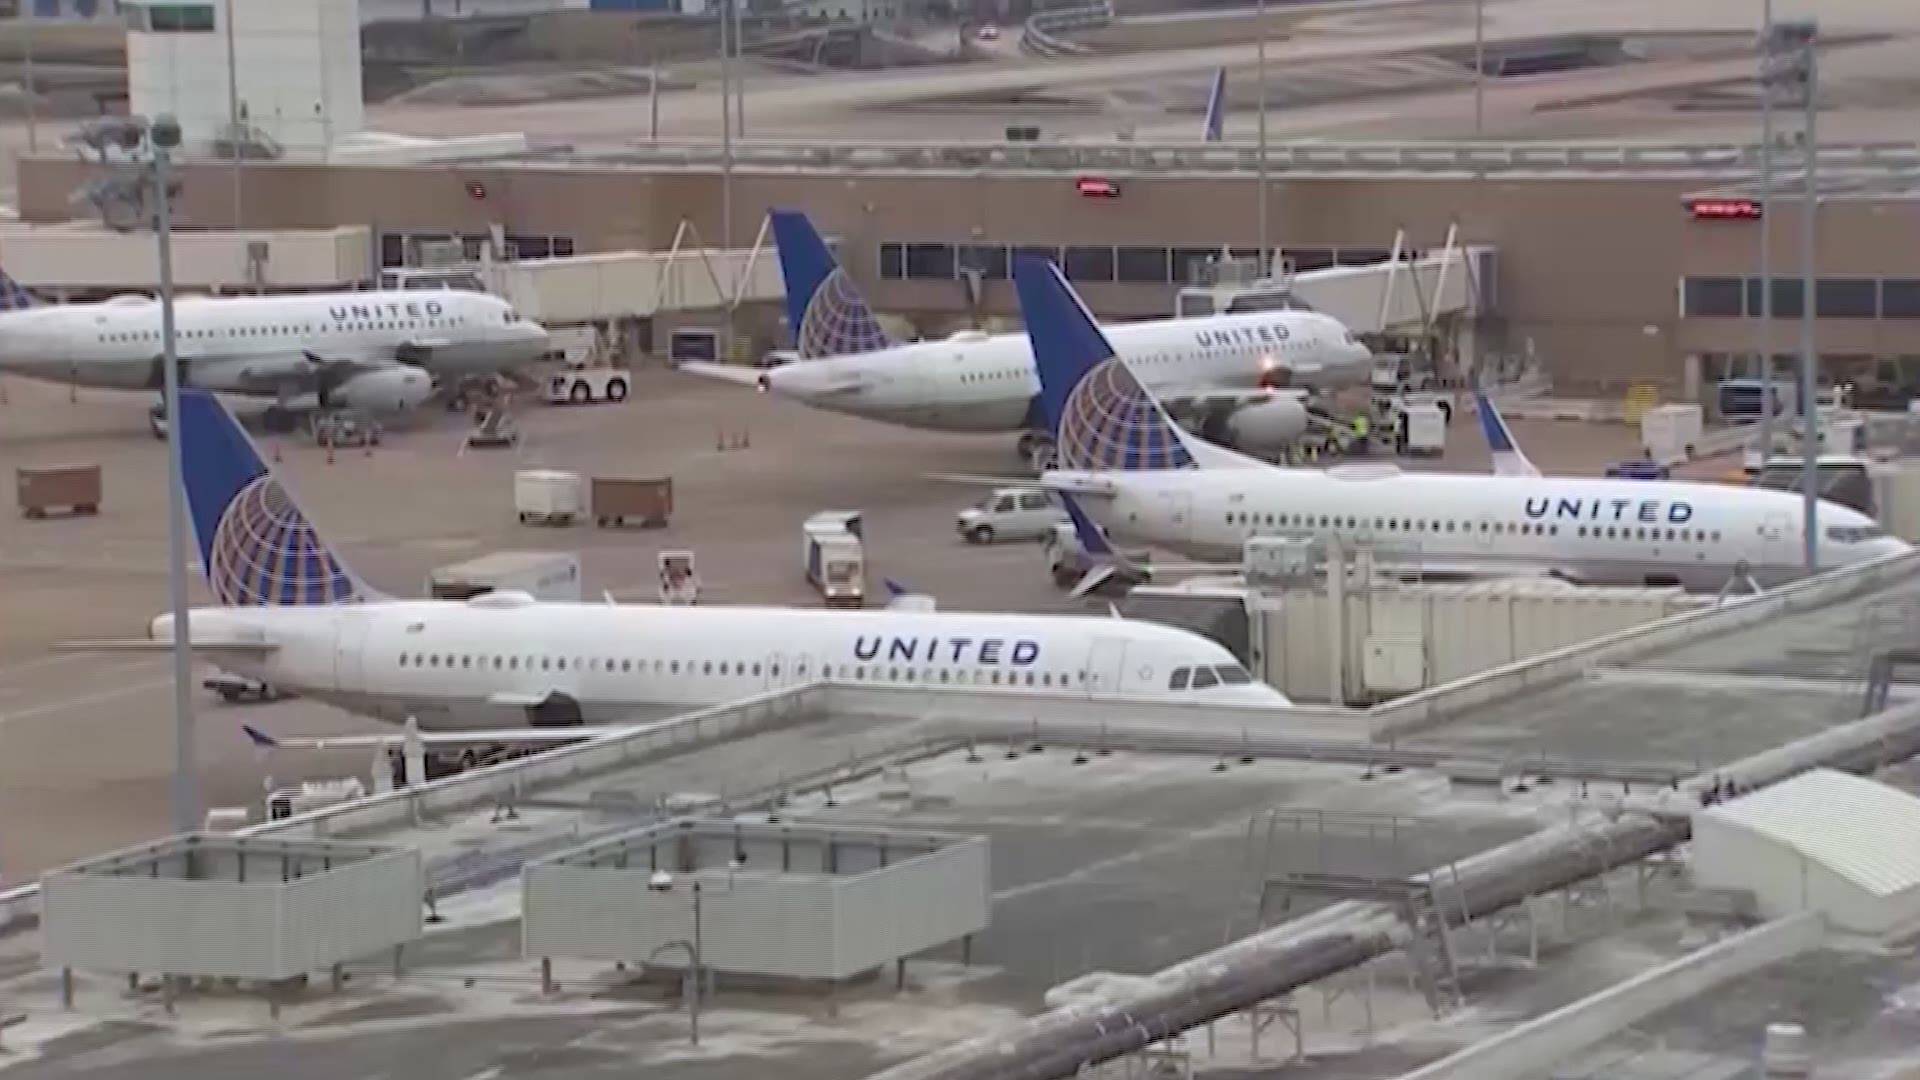 United Airlines employees have to find a way to keep cool while they work to get 500 flights off the ground in Houston every single day. So how do they do it?